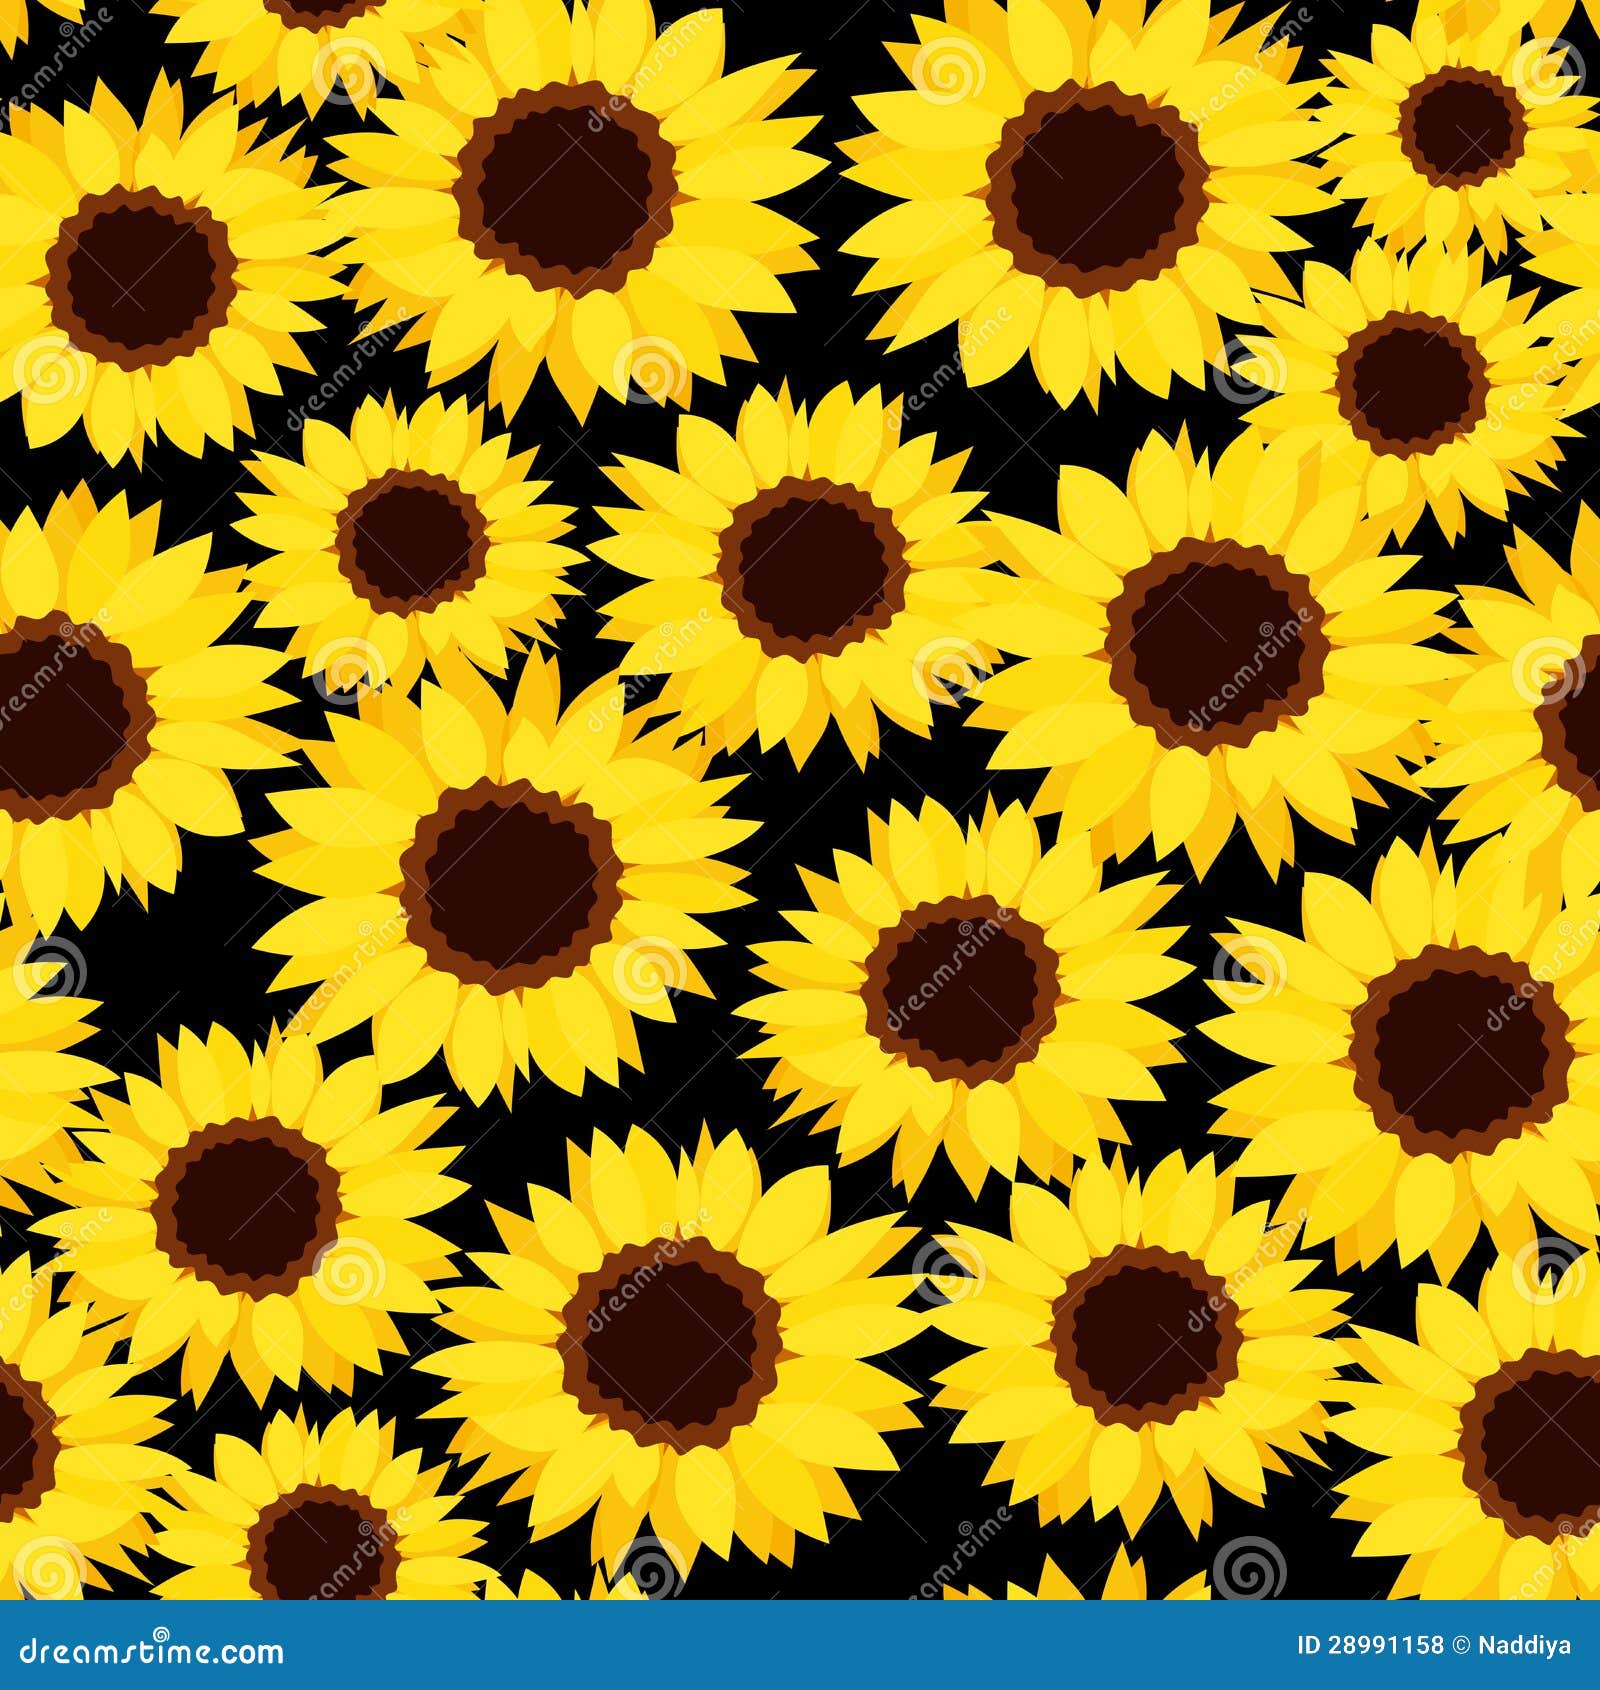 seamless background with sunflowers.